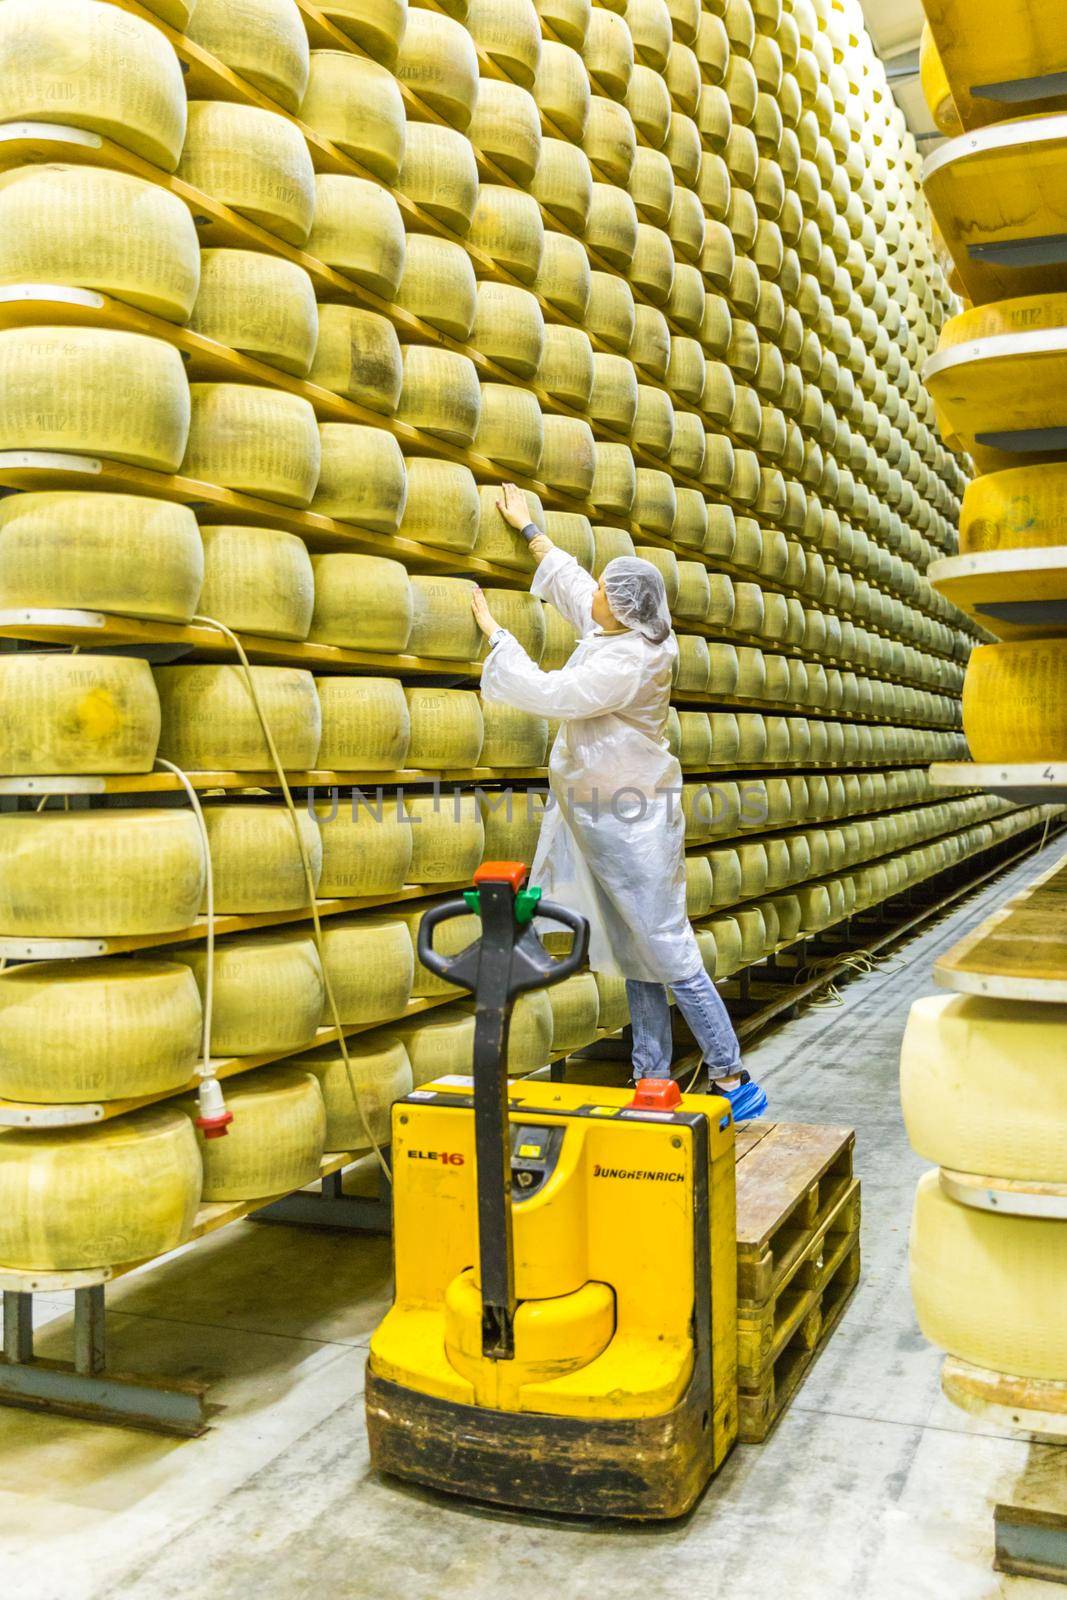 BOLOGNA , ITALY - MAY 02, 2018: Worker inspecting cheese in Parmigiano Cheese factory. Shelves with aging cheese in Italy, Bologna